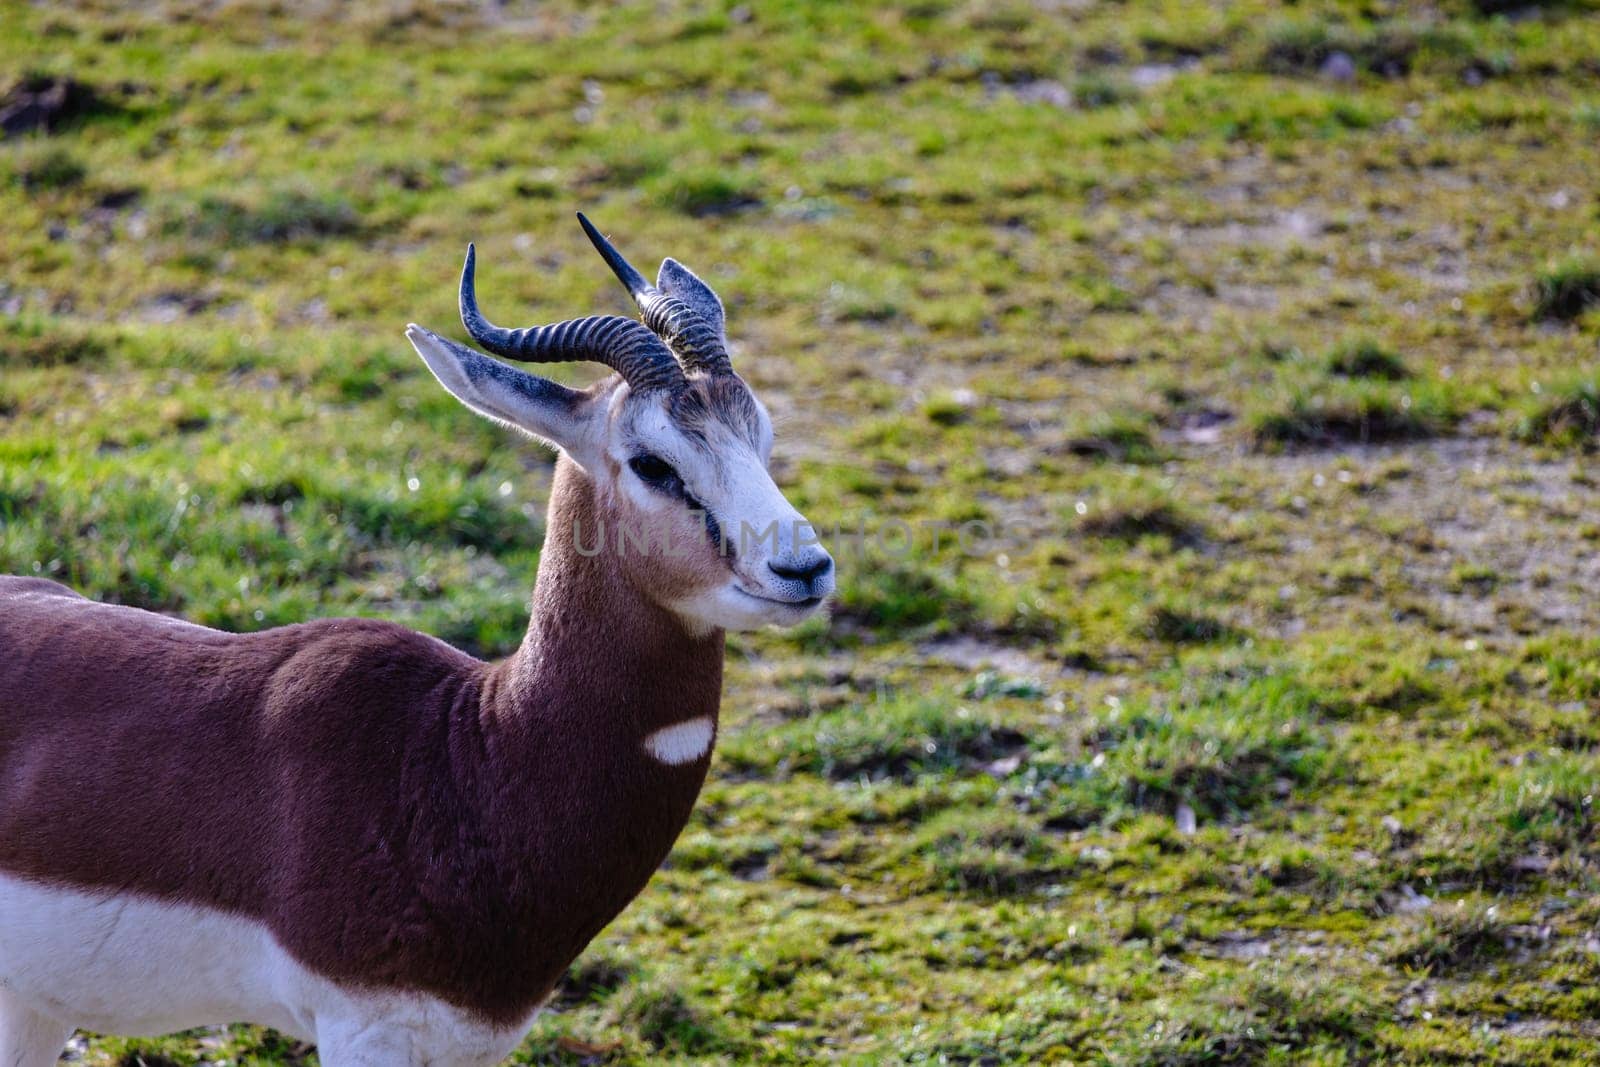 A majestic antelope stands tall in a grassy field, its impressive horns glistening in the sunlight, showcasing the beauty of nature and the power of the animal kingdom